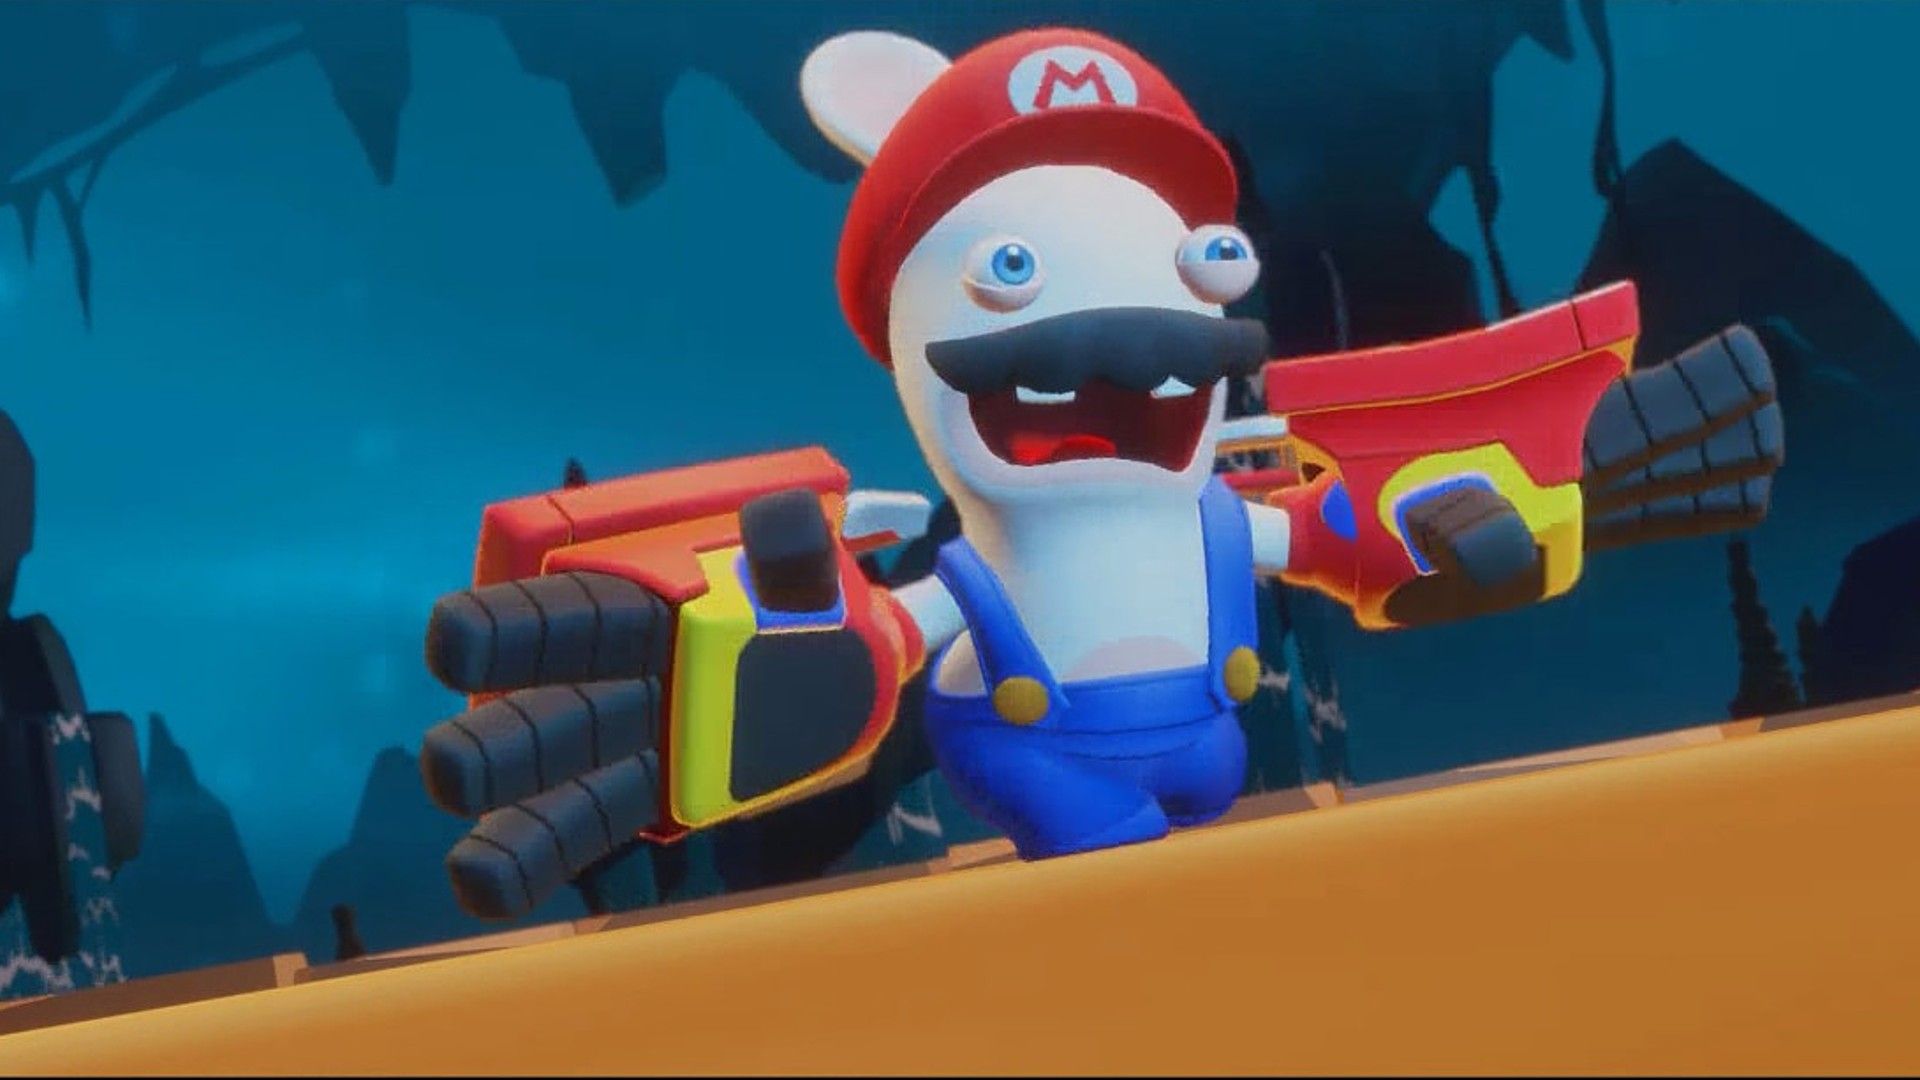 Rabbid Mario poses with The Dukes (his weapons) in the Sunrise Temple of Beacon Beach in Mario + Rabbids Sparks Of Hope